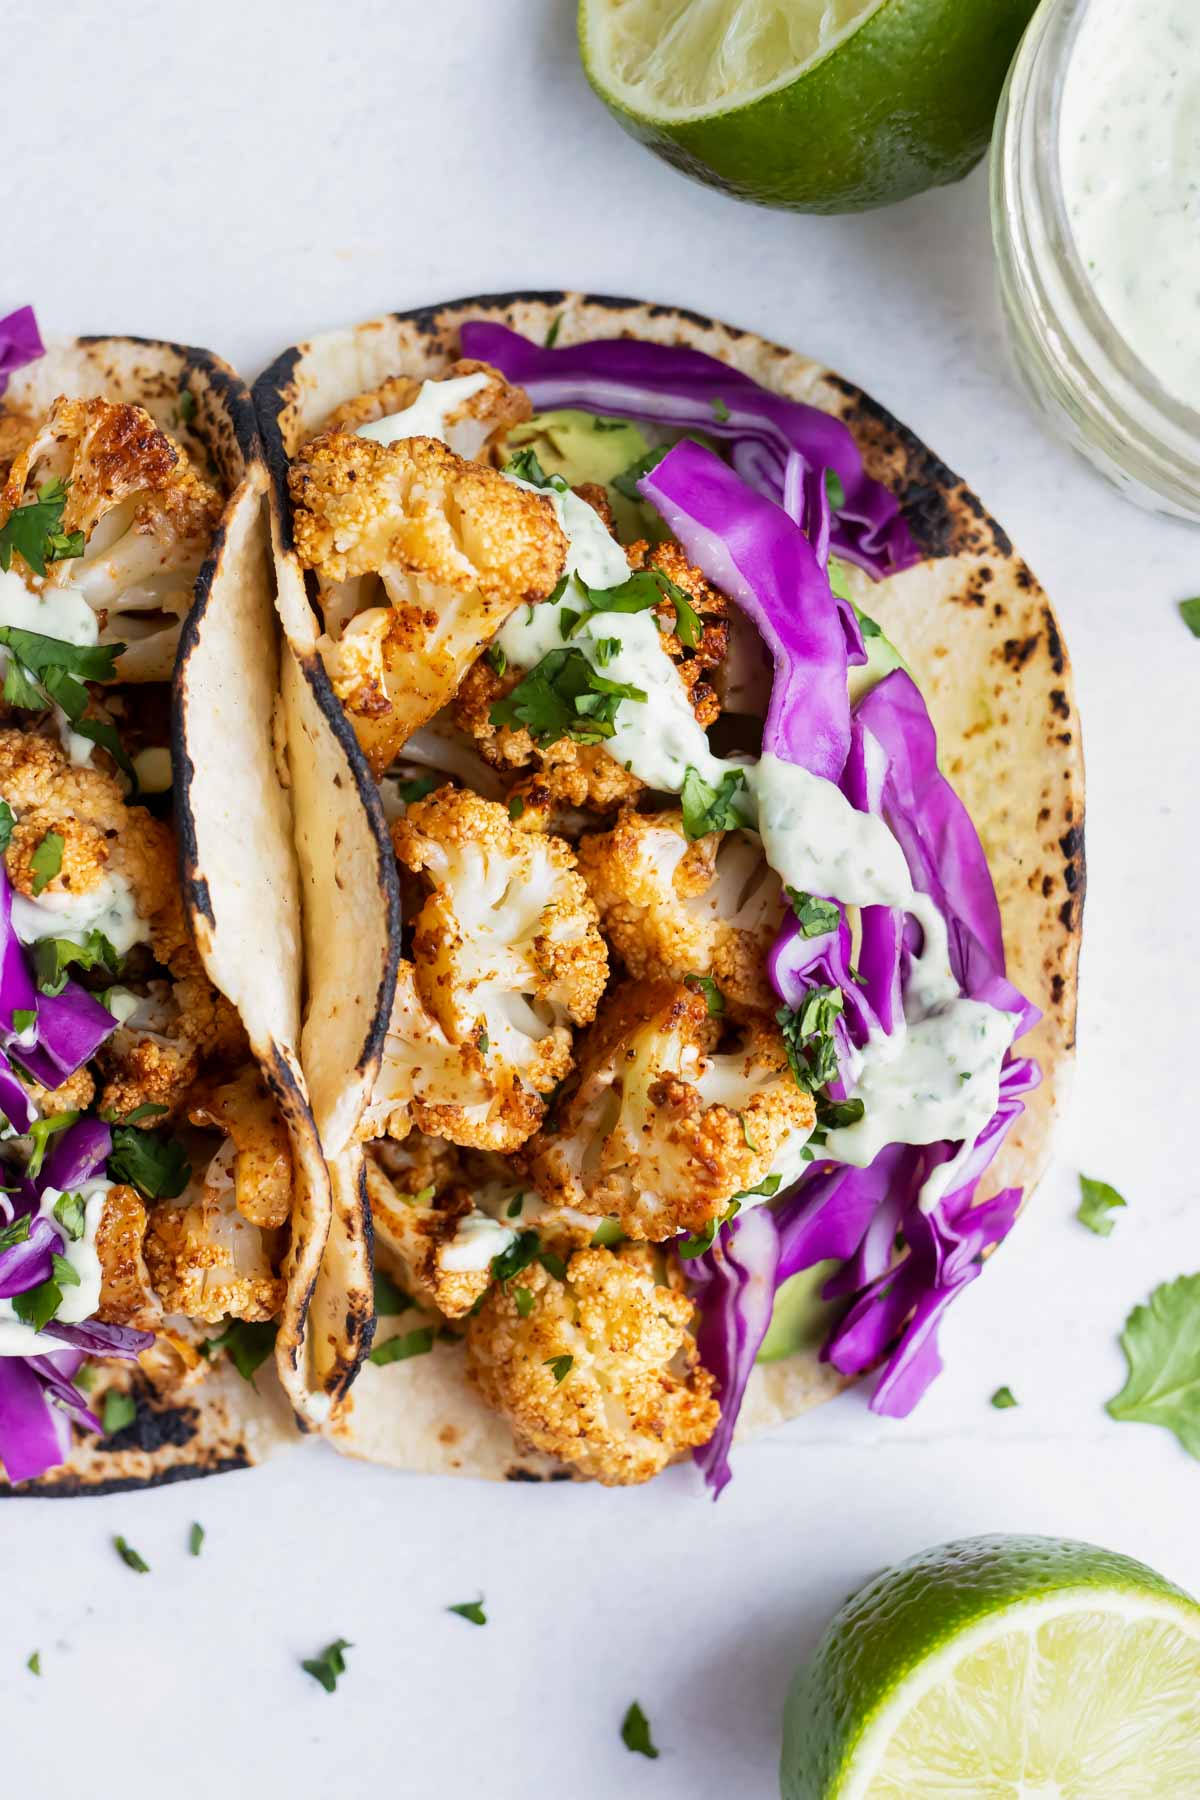 Gluten-free, vegetarian, and plant-based tacos made from vegetables.